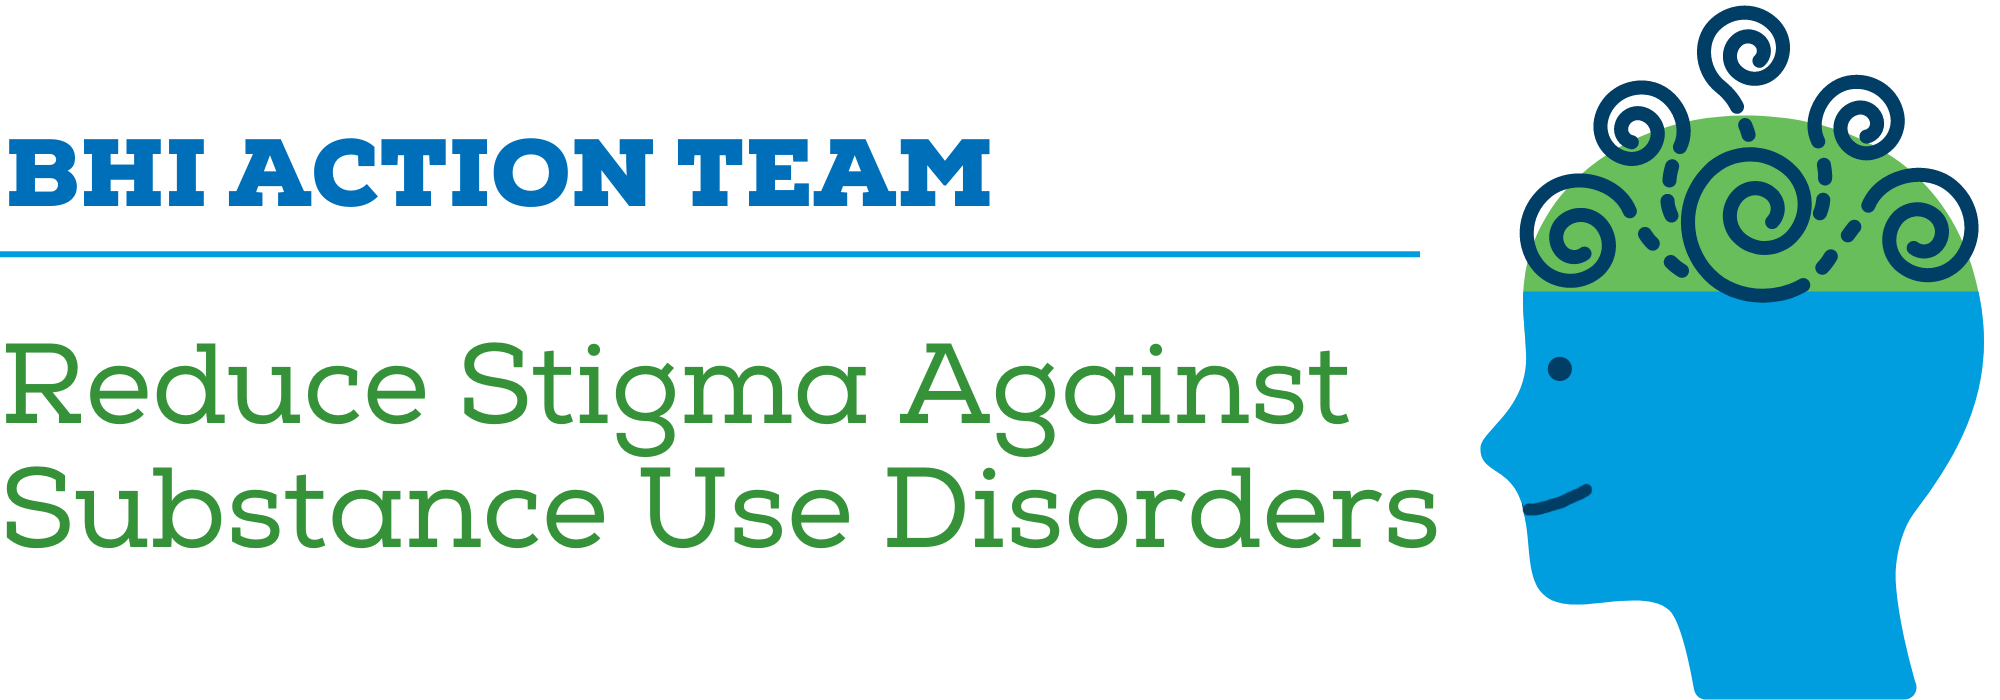 Reduce Stigma Against Substance Use Disorders